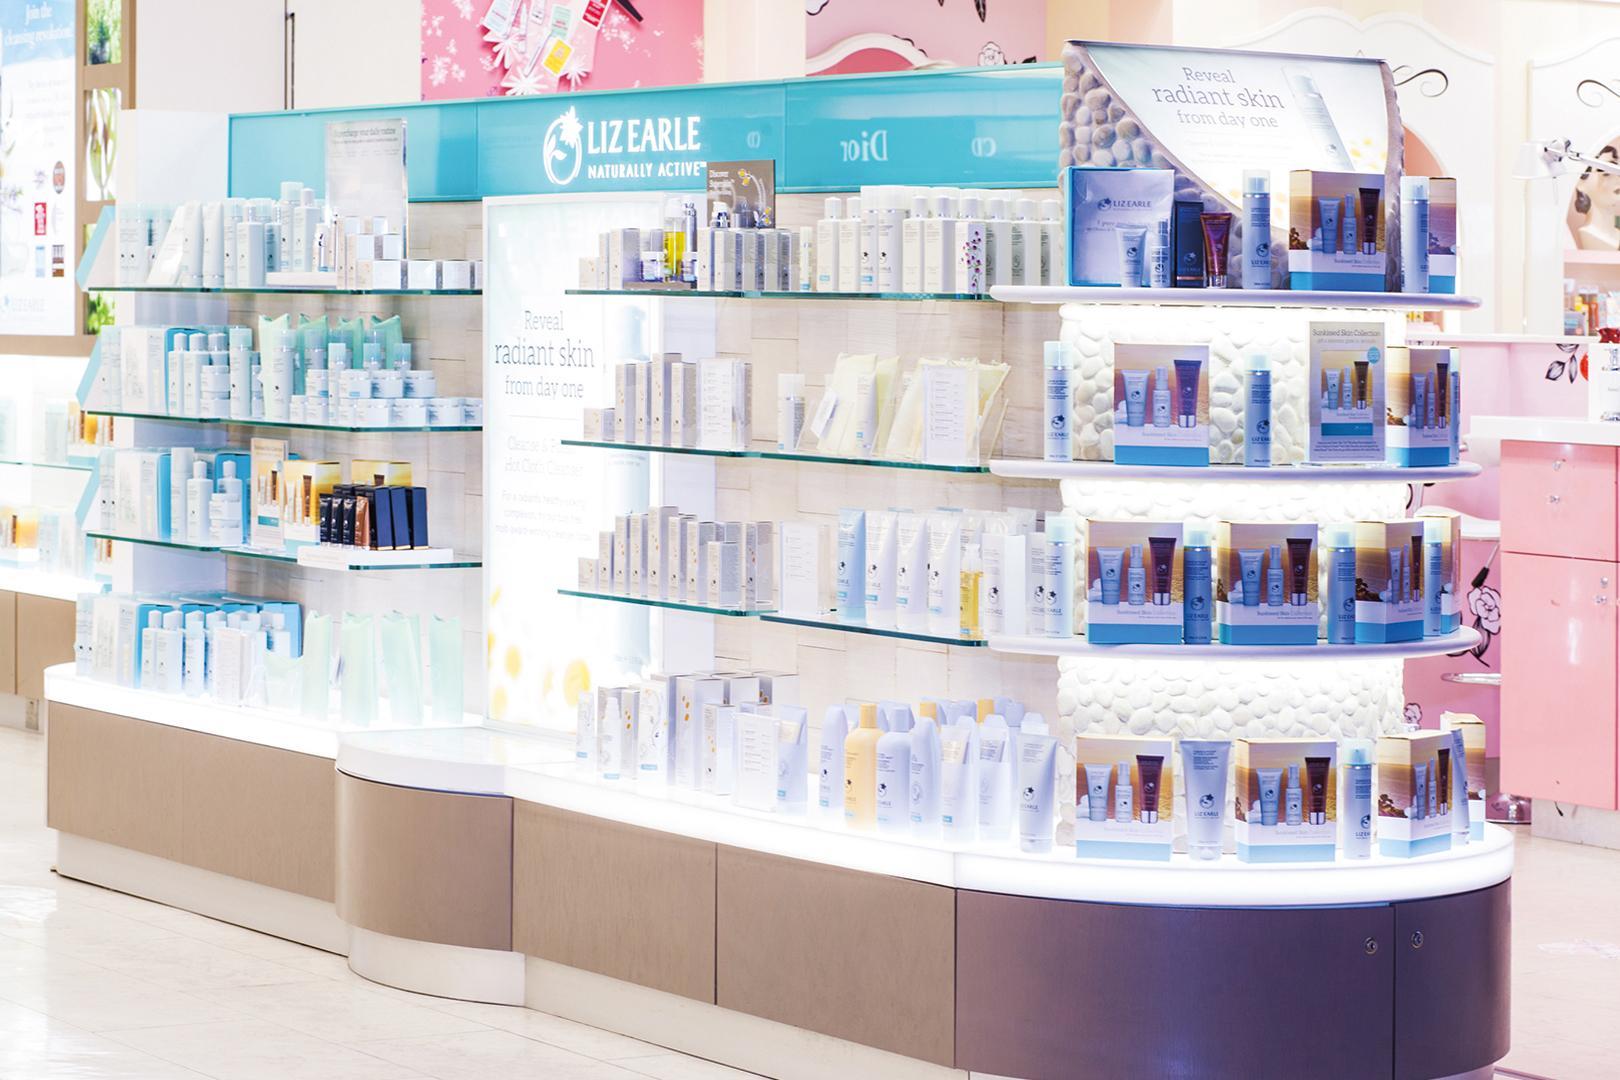 Liz Earle cosmetic product stand